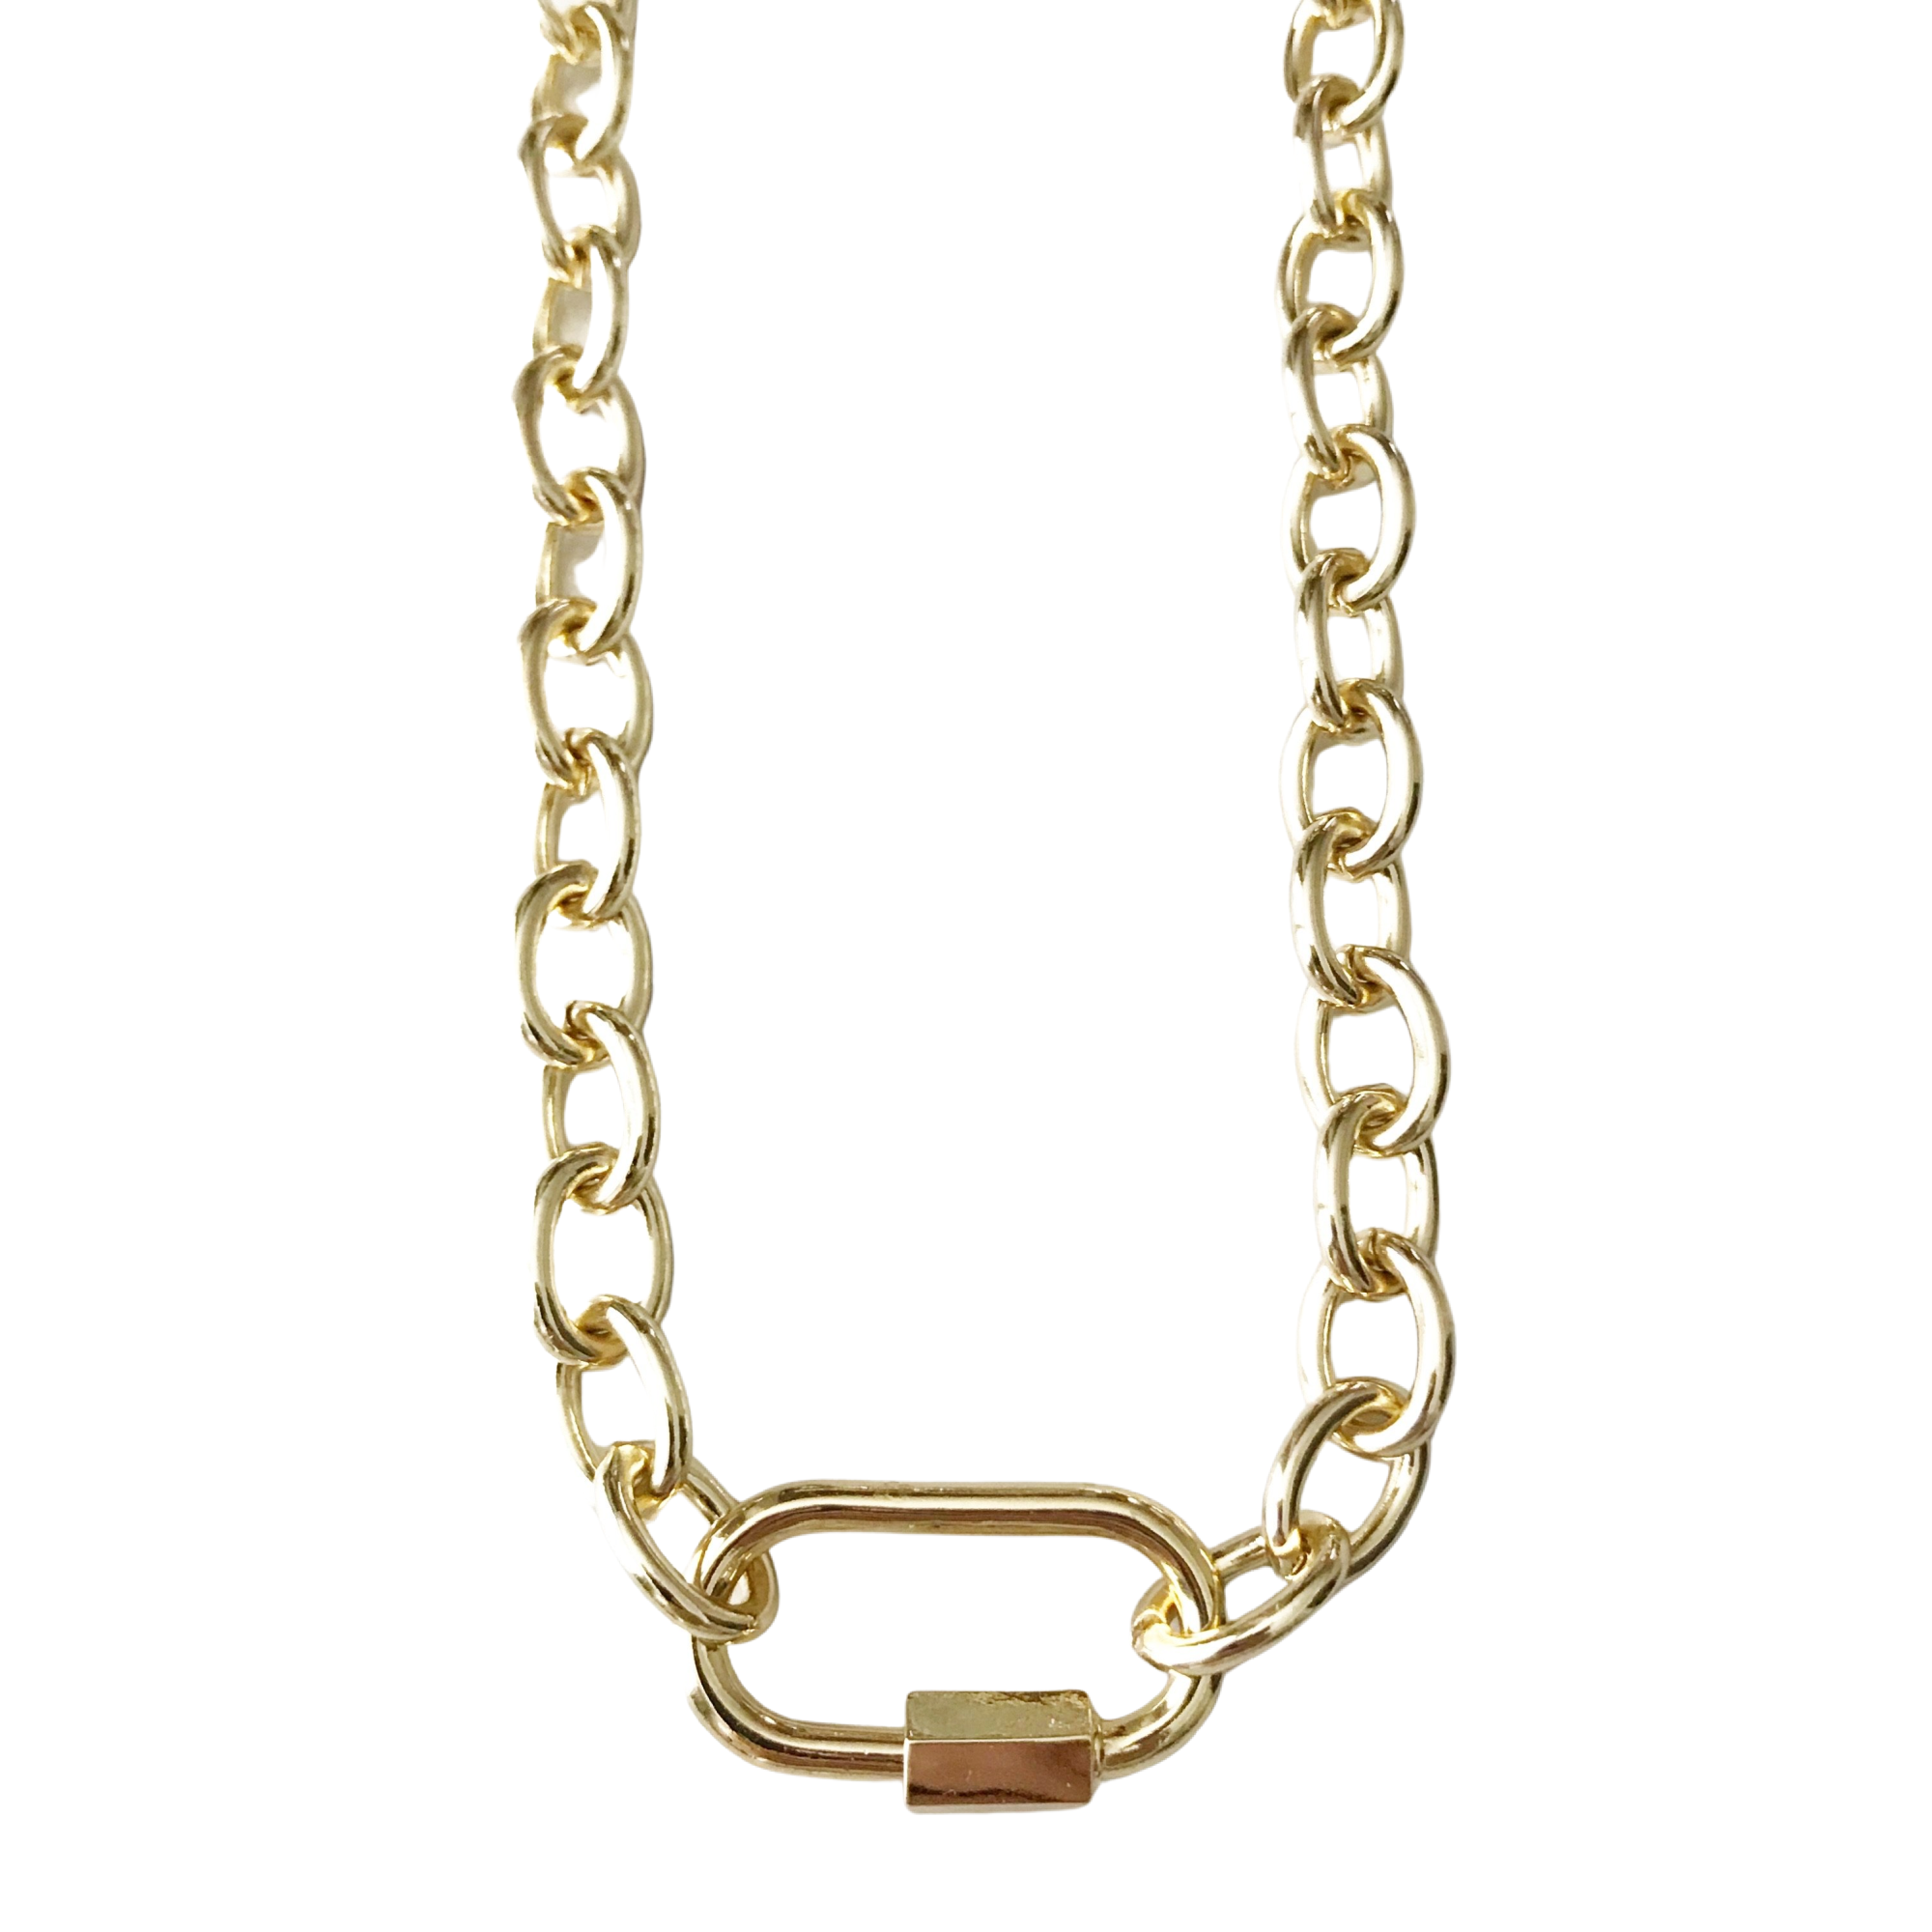 Gold Carabiner Necklace Chunky Gold Necklace Double Chain Gold Necklace  Gold Pave Carabiner Necklace Gold Link Chain Necklace Chunky Chain 